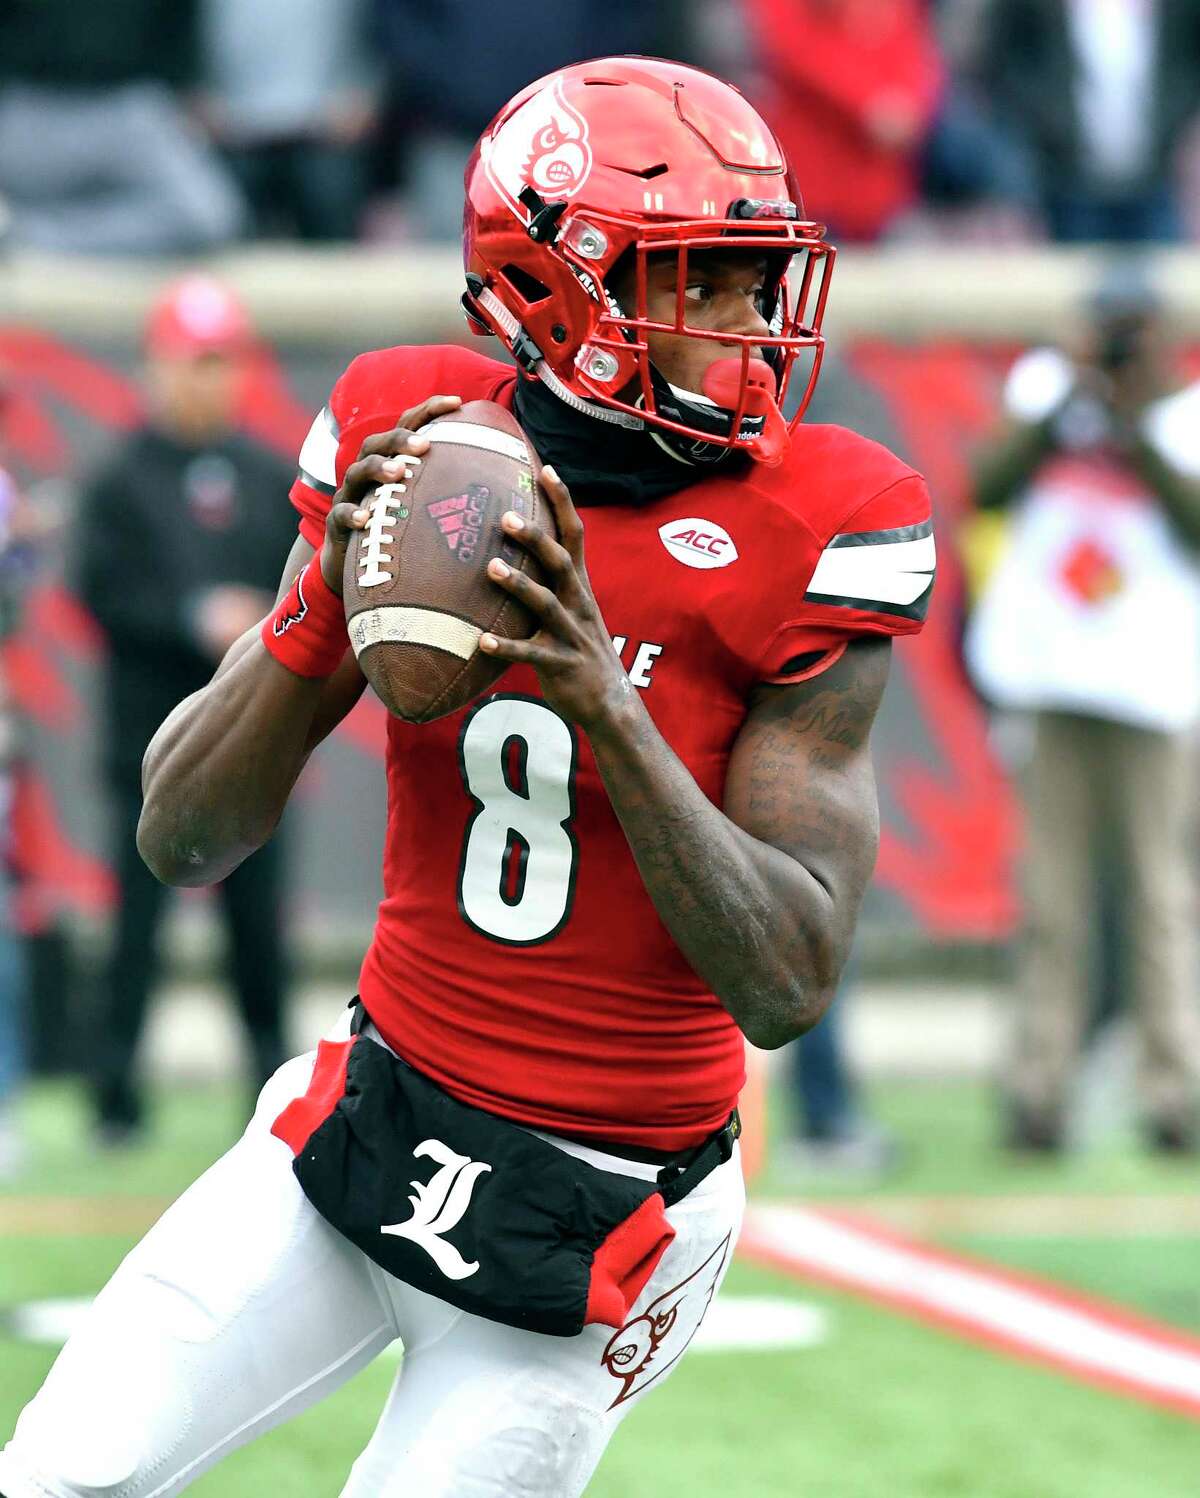 FILE- In this Nov. 26, 2016, file photo, Louisville's Lamar Jackson (8) looks for an open receiver during the first half of an NCAA college football game against Kentucky in Louisville, Ky. Jackson won the Heisman Trophy last year and has a chance to become only the second two-time winner of the award. (AP Photo/Timothy D. Easley, File)